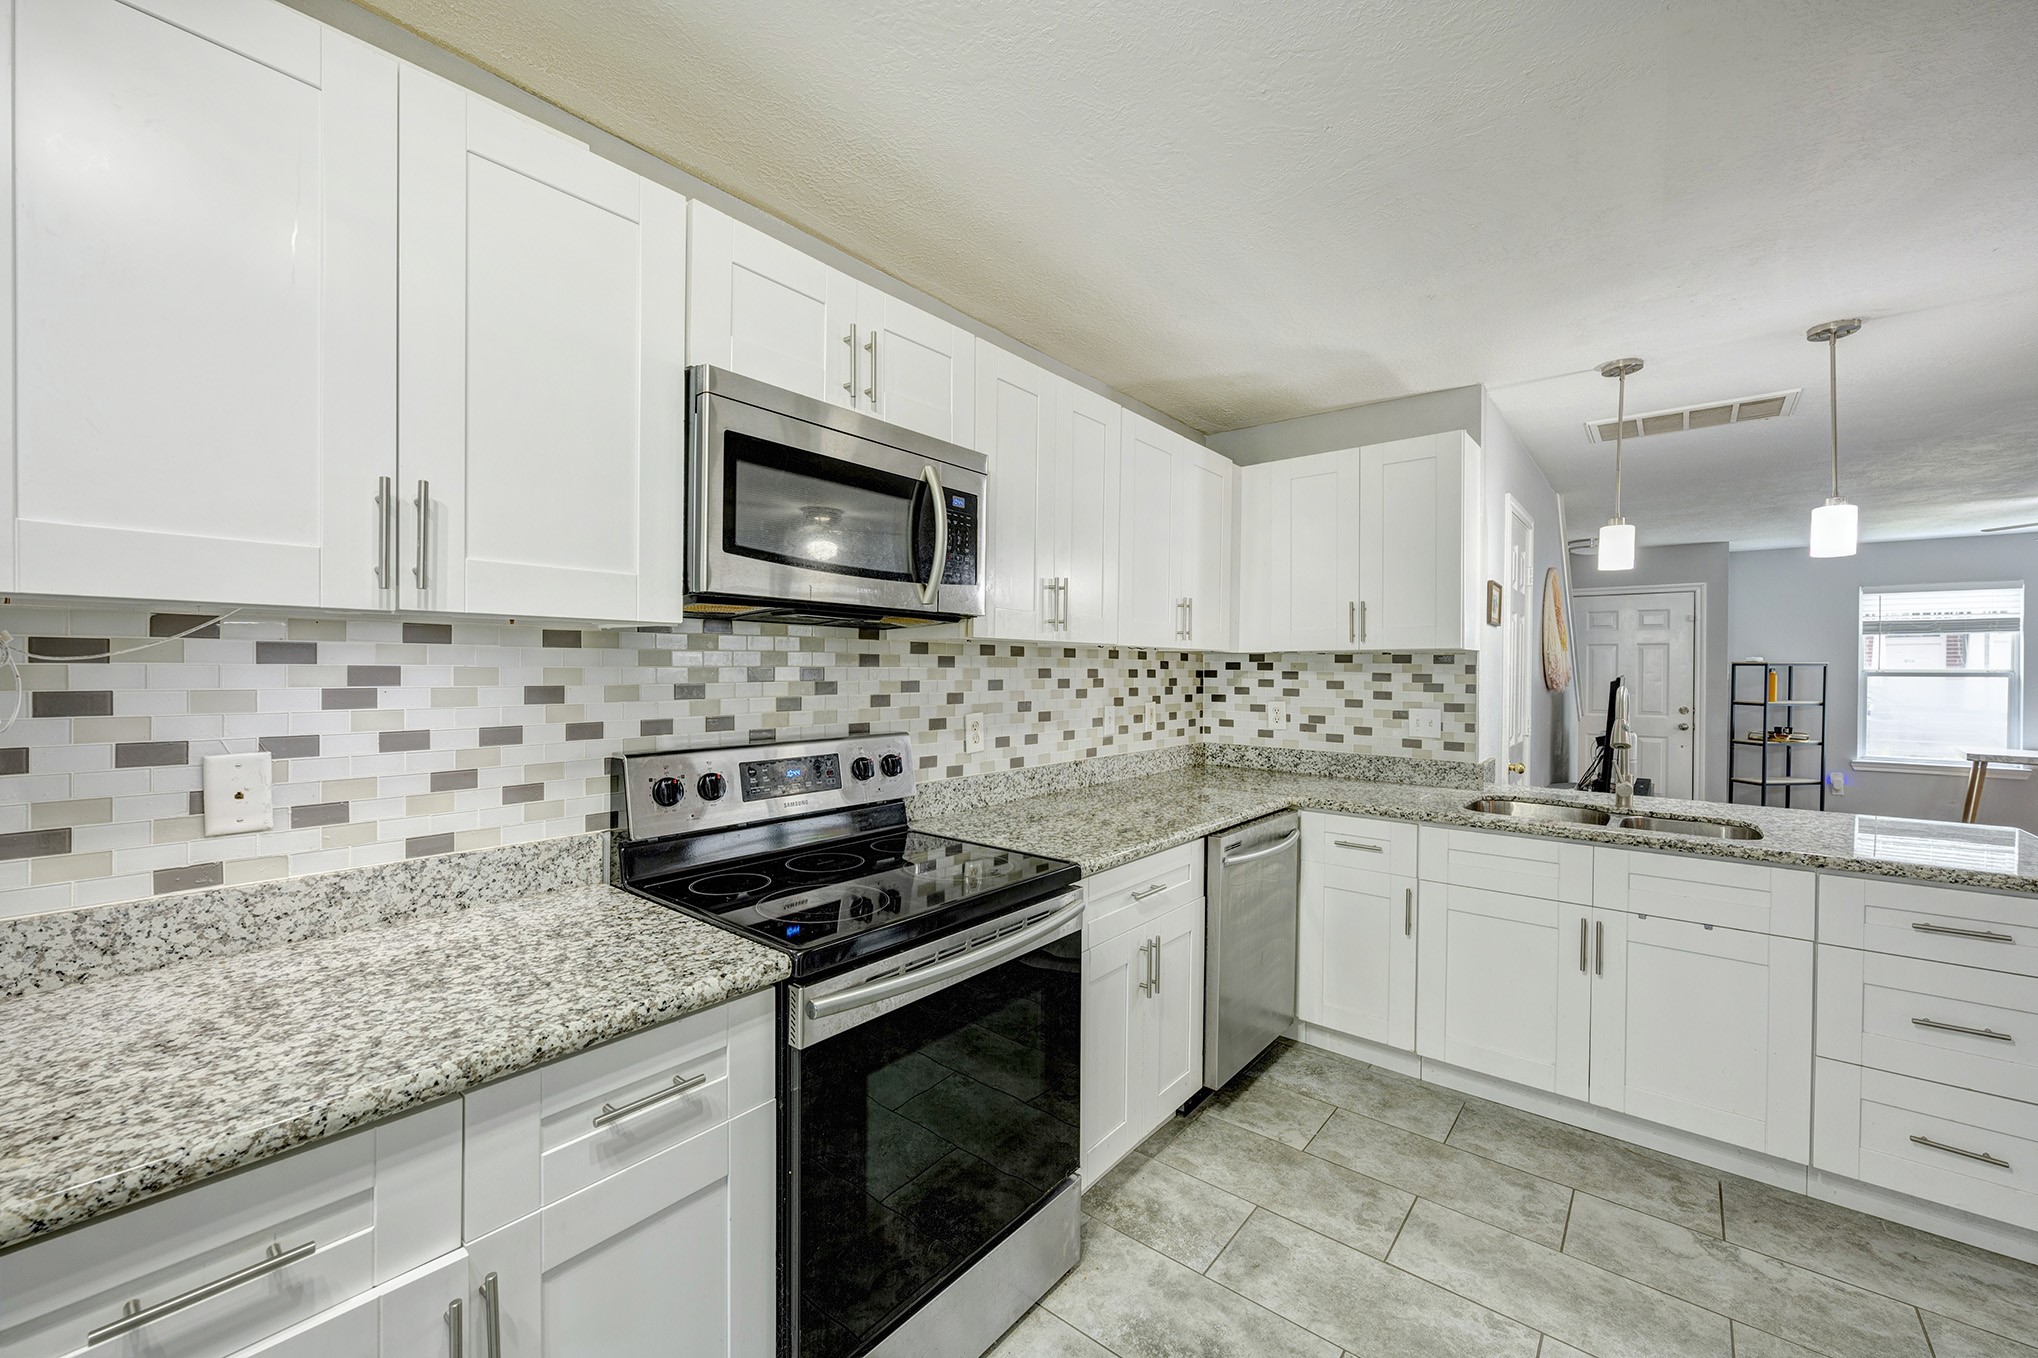 Granite counters and designer backsplash. Microwave above oven/cooktop. Stainless appliances.